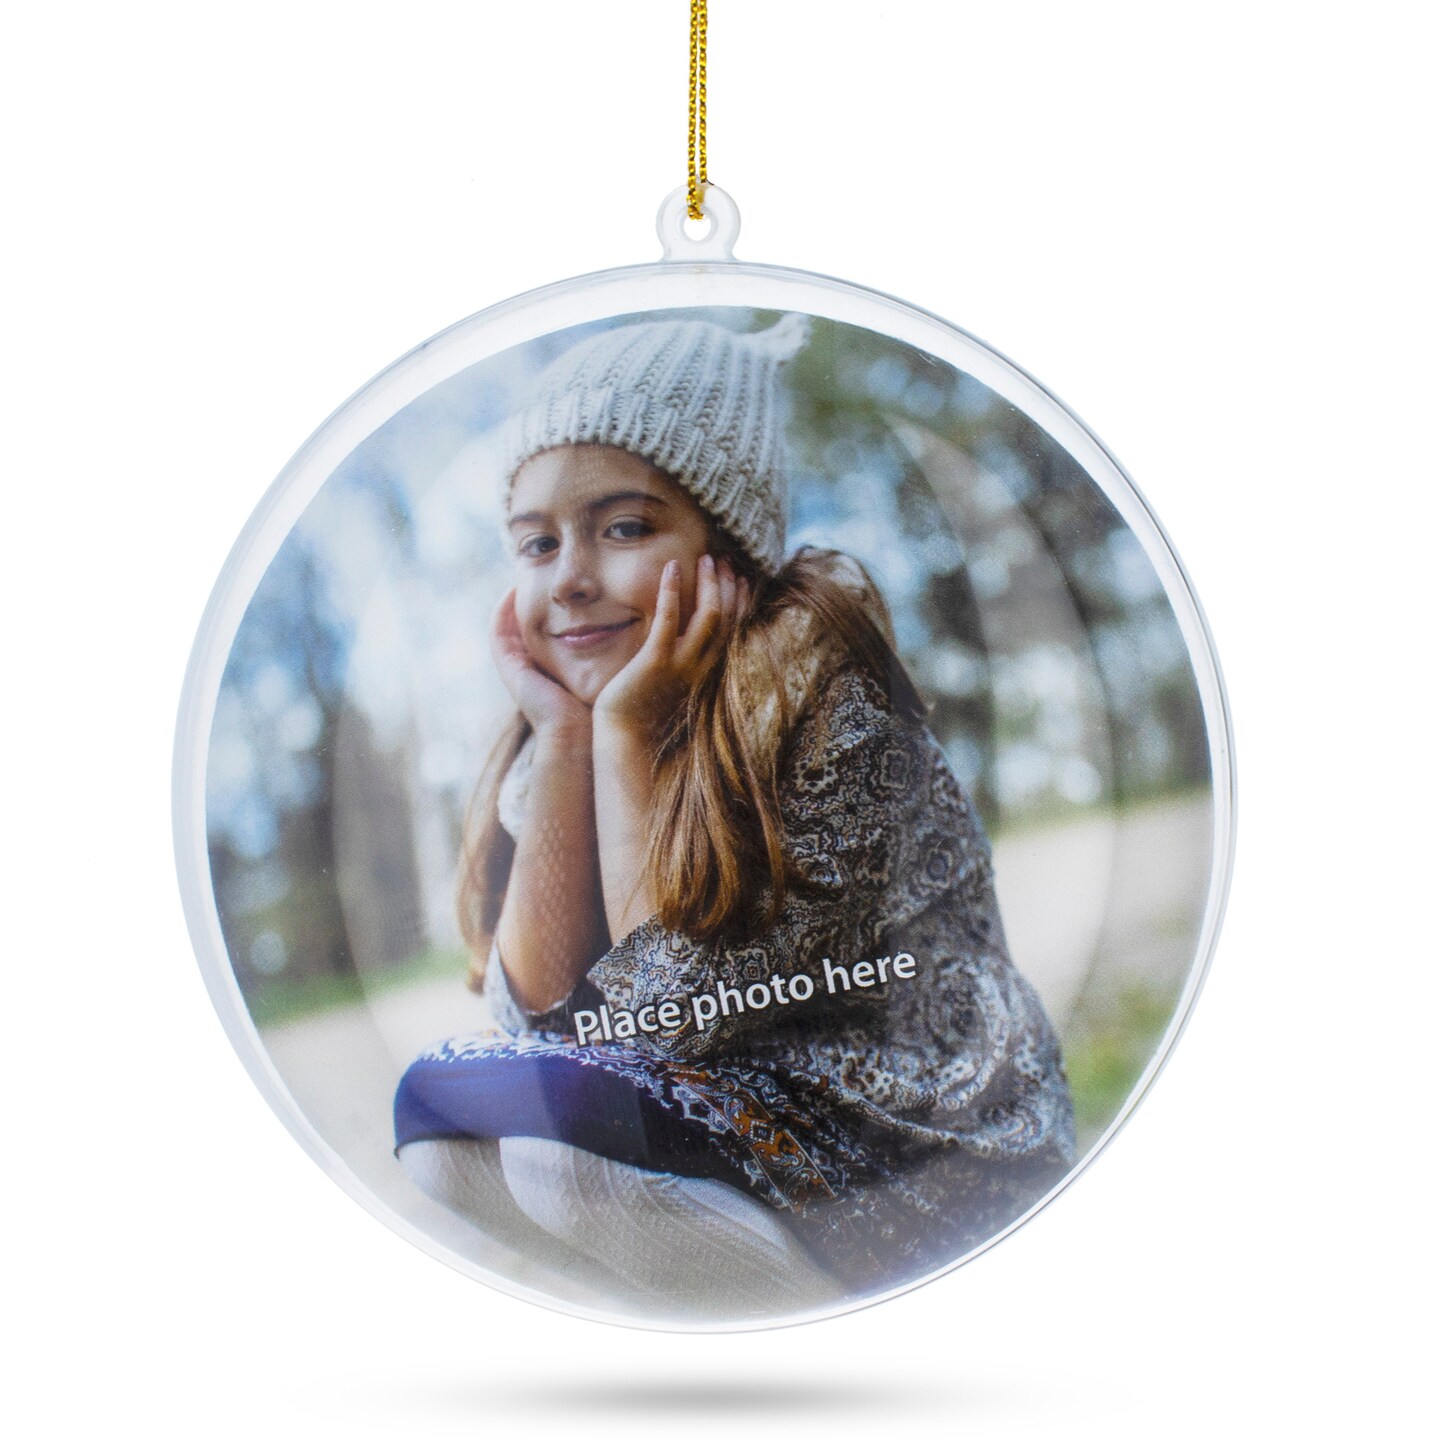 Openable Fallible Picture Frame Clear Plastic Flat Disc Christmas Ornament  DIY Craft 4.25 Inches